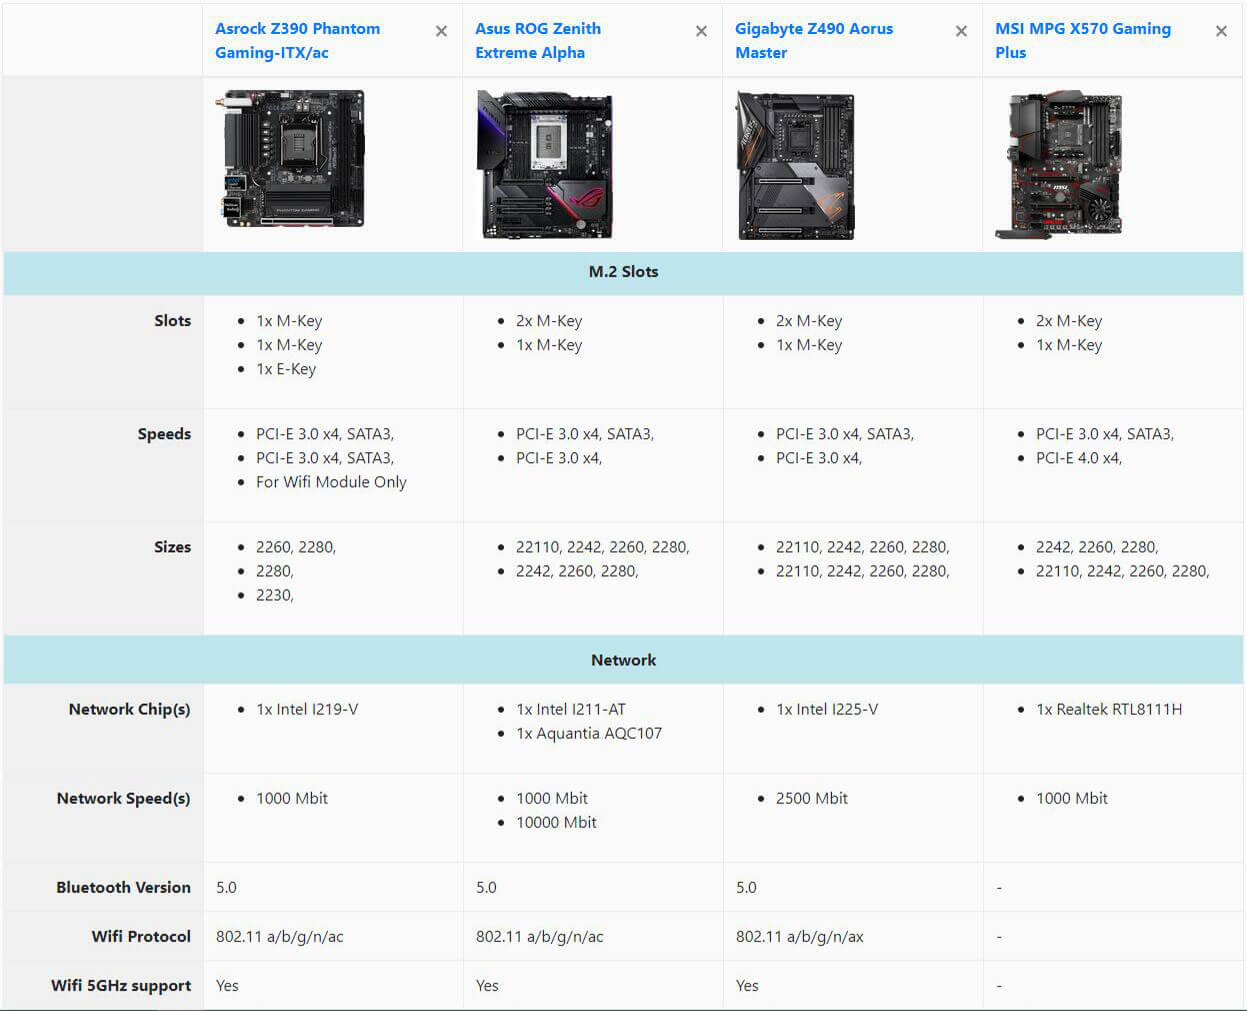 Compare M.2 Slots of Motherboards